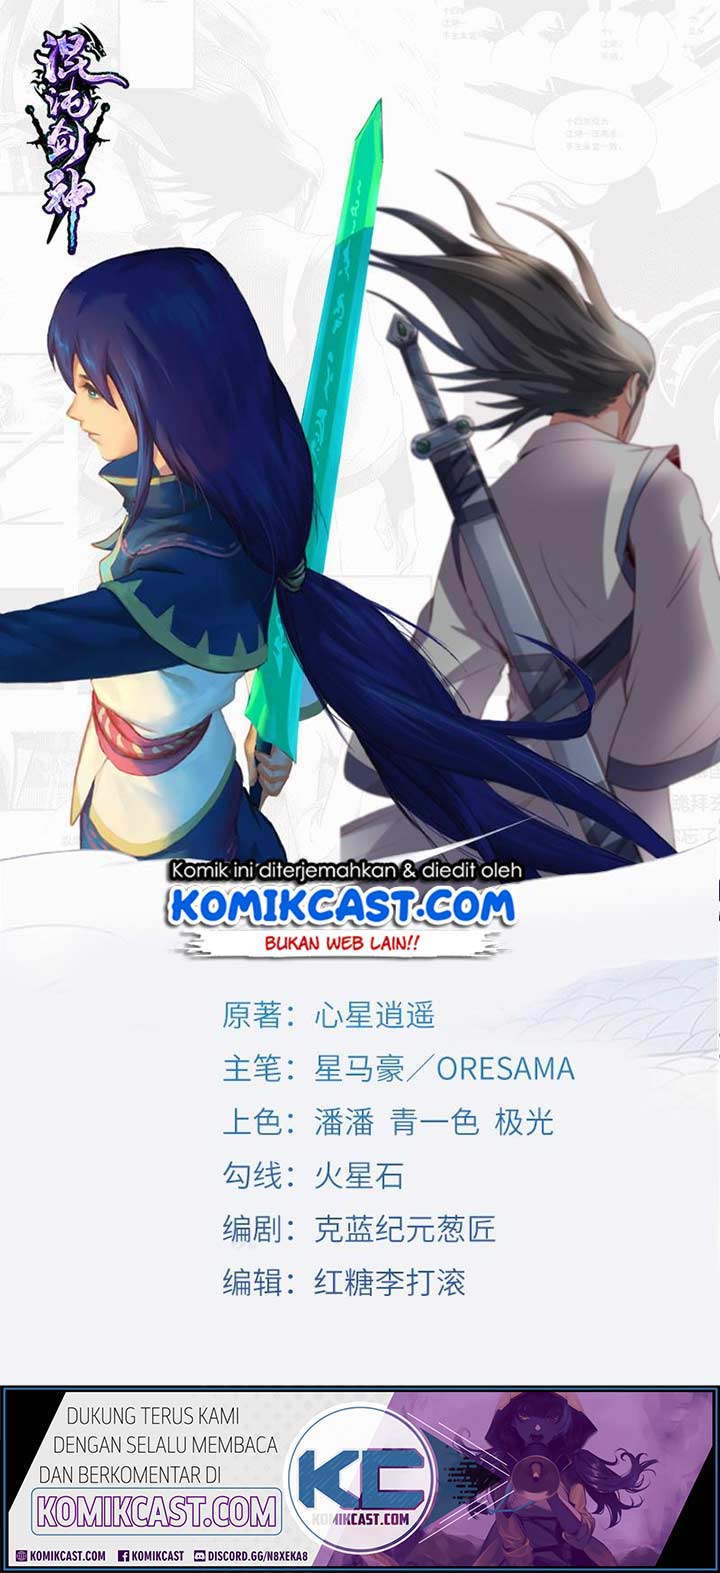 Chaotic Sword God Chapter 158